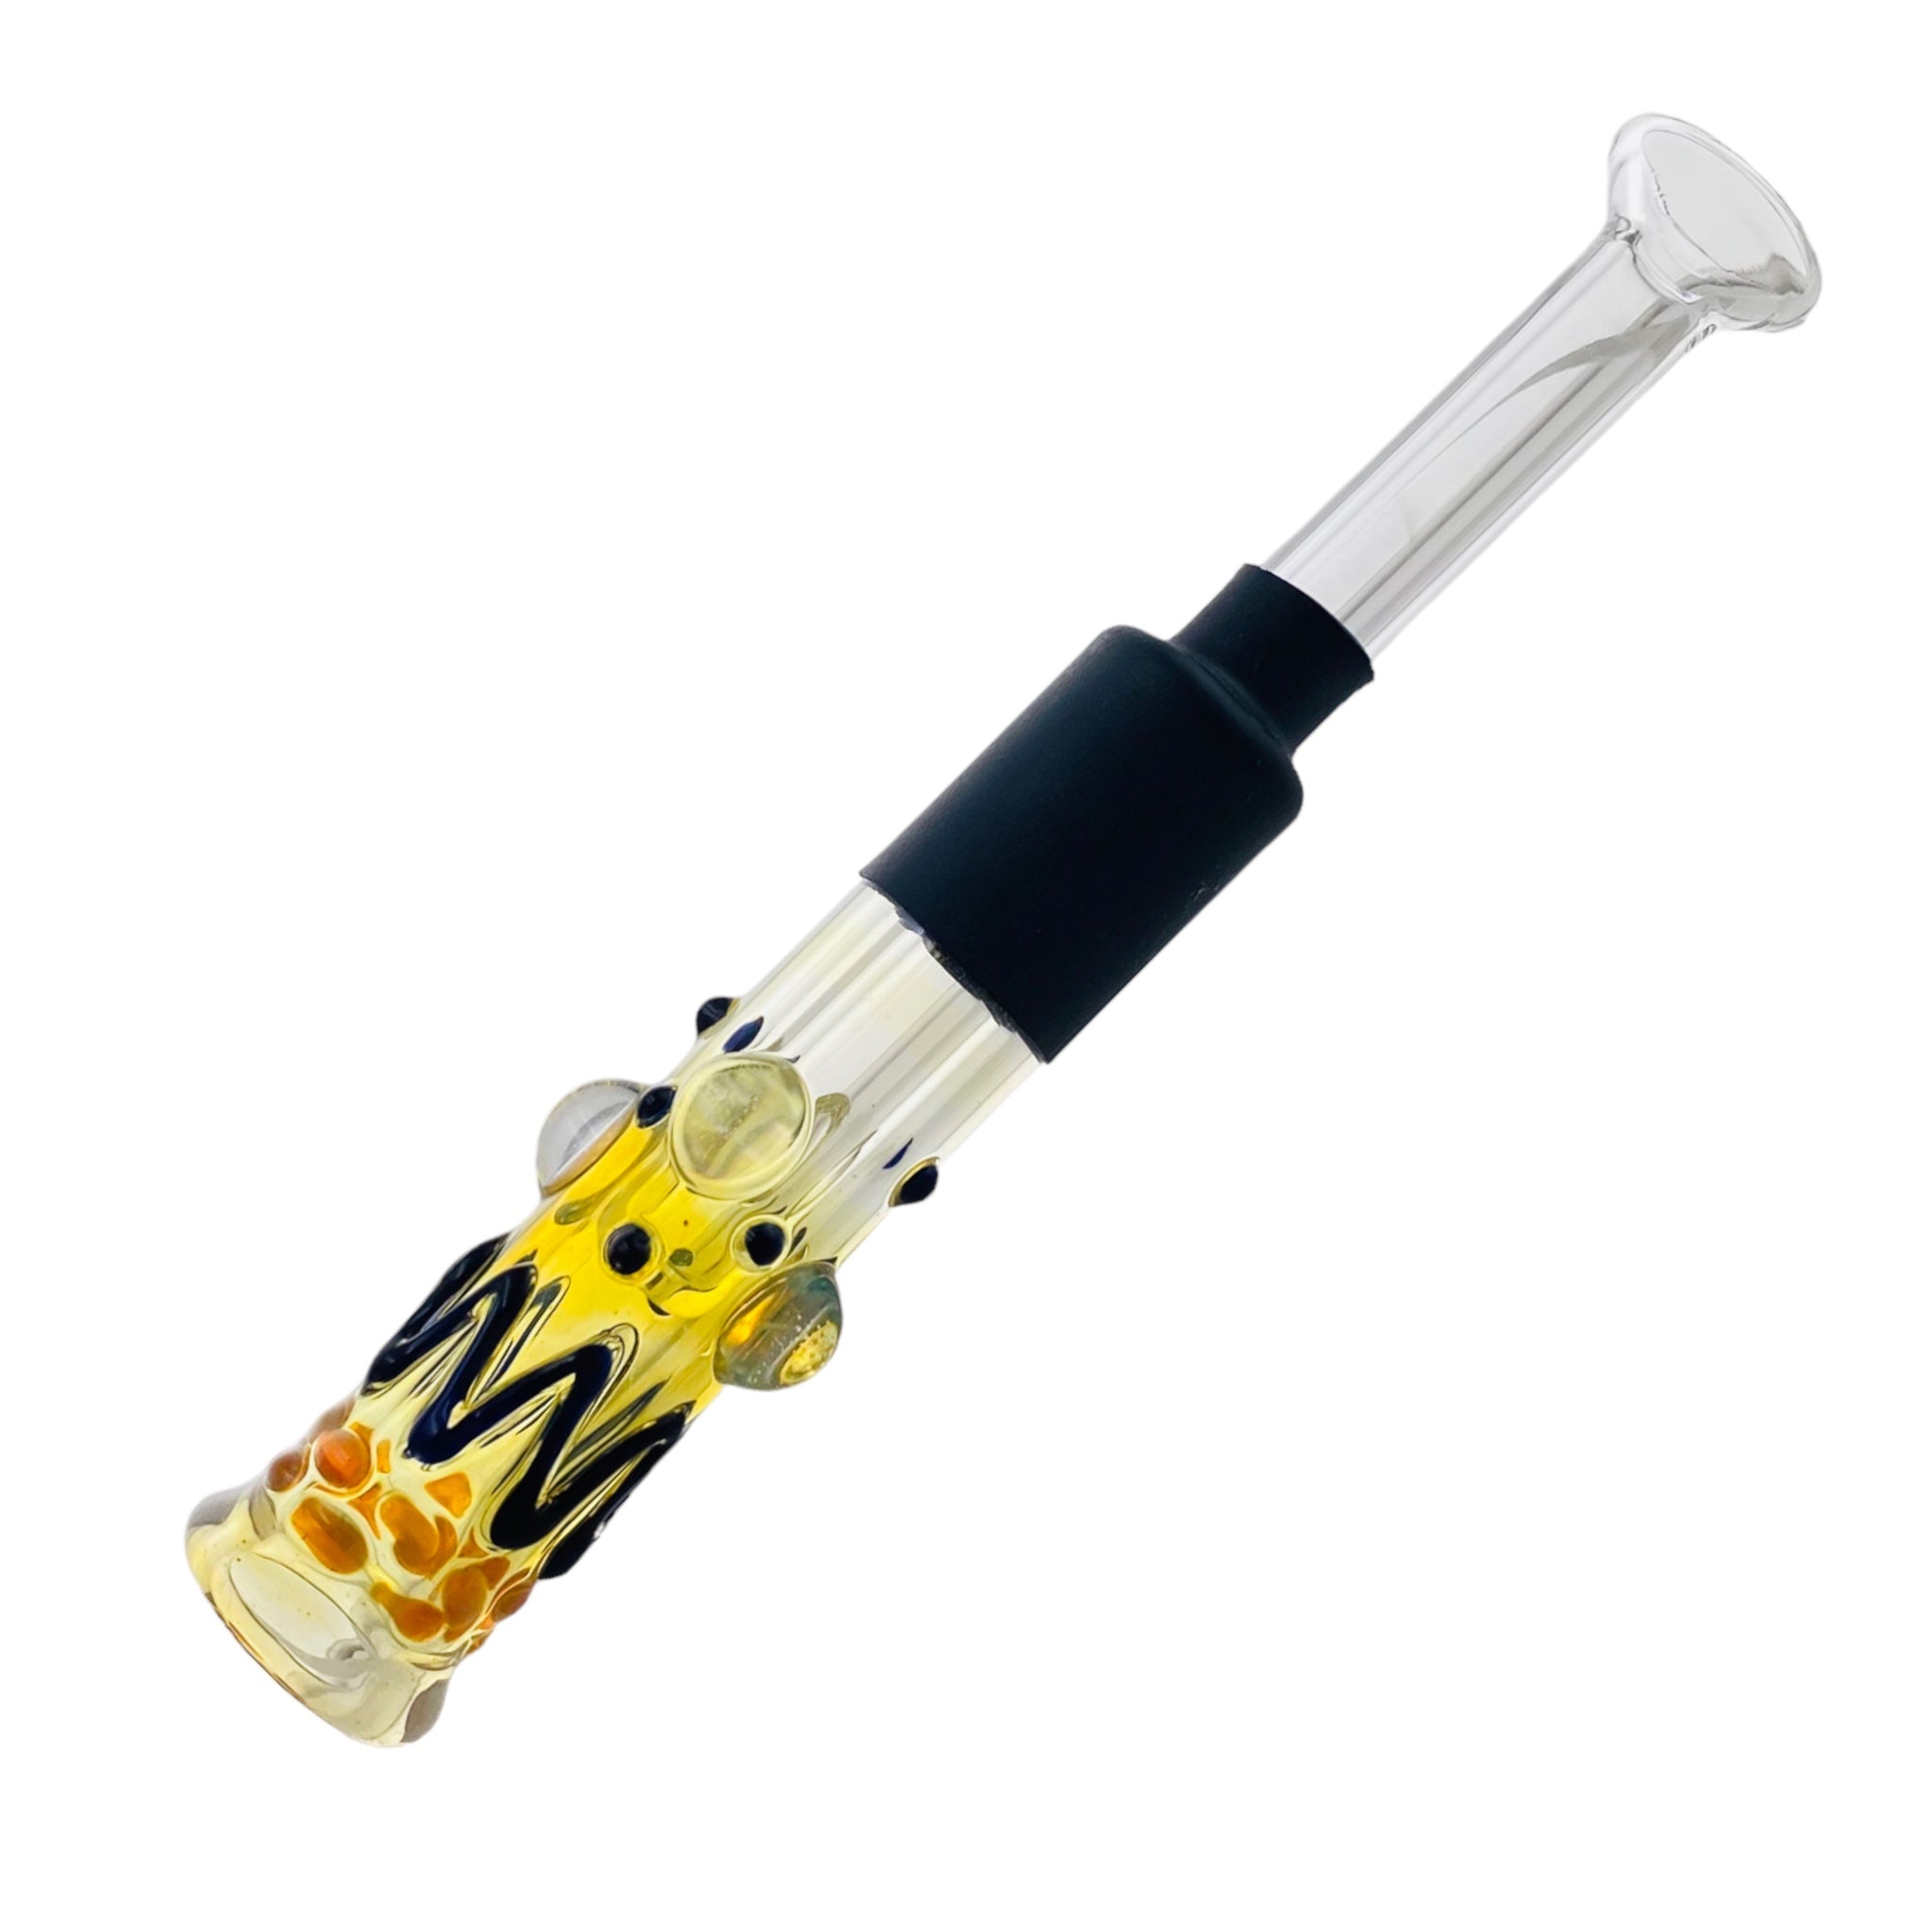 Jellyfish Glass - Yellow Silver Fumed Glass Blunt With Black Dots And Wrap